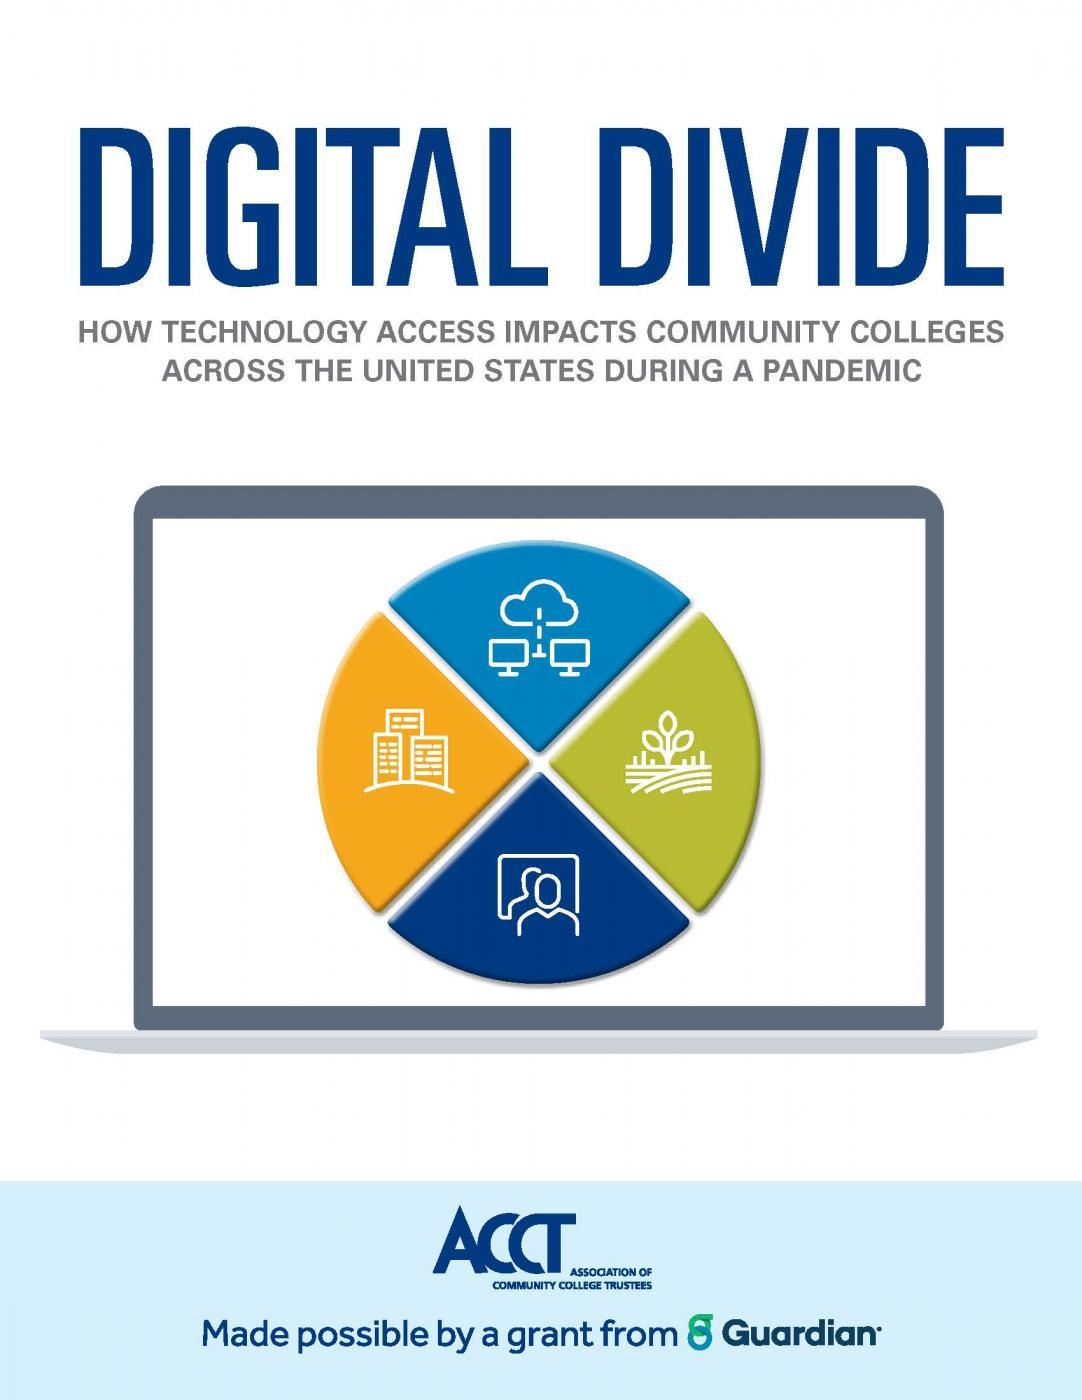 Digital Divide: How Technology Access Impacts Community Colleges Across the United States During a Pandemic